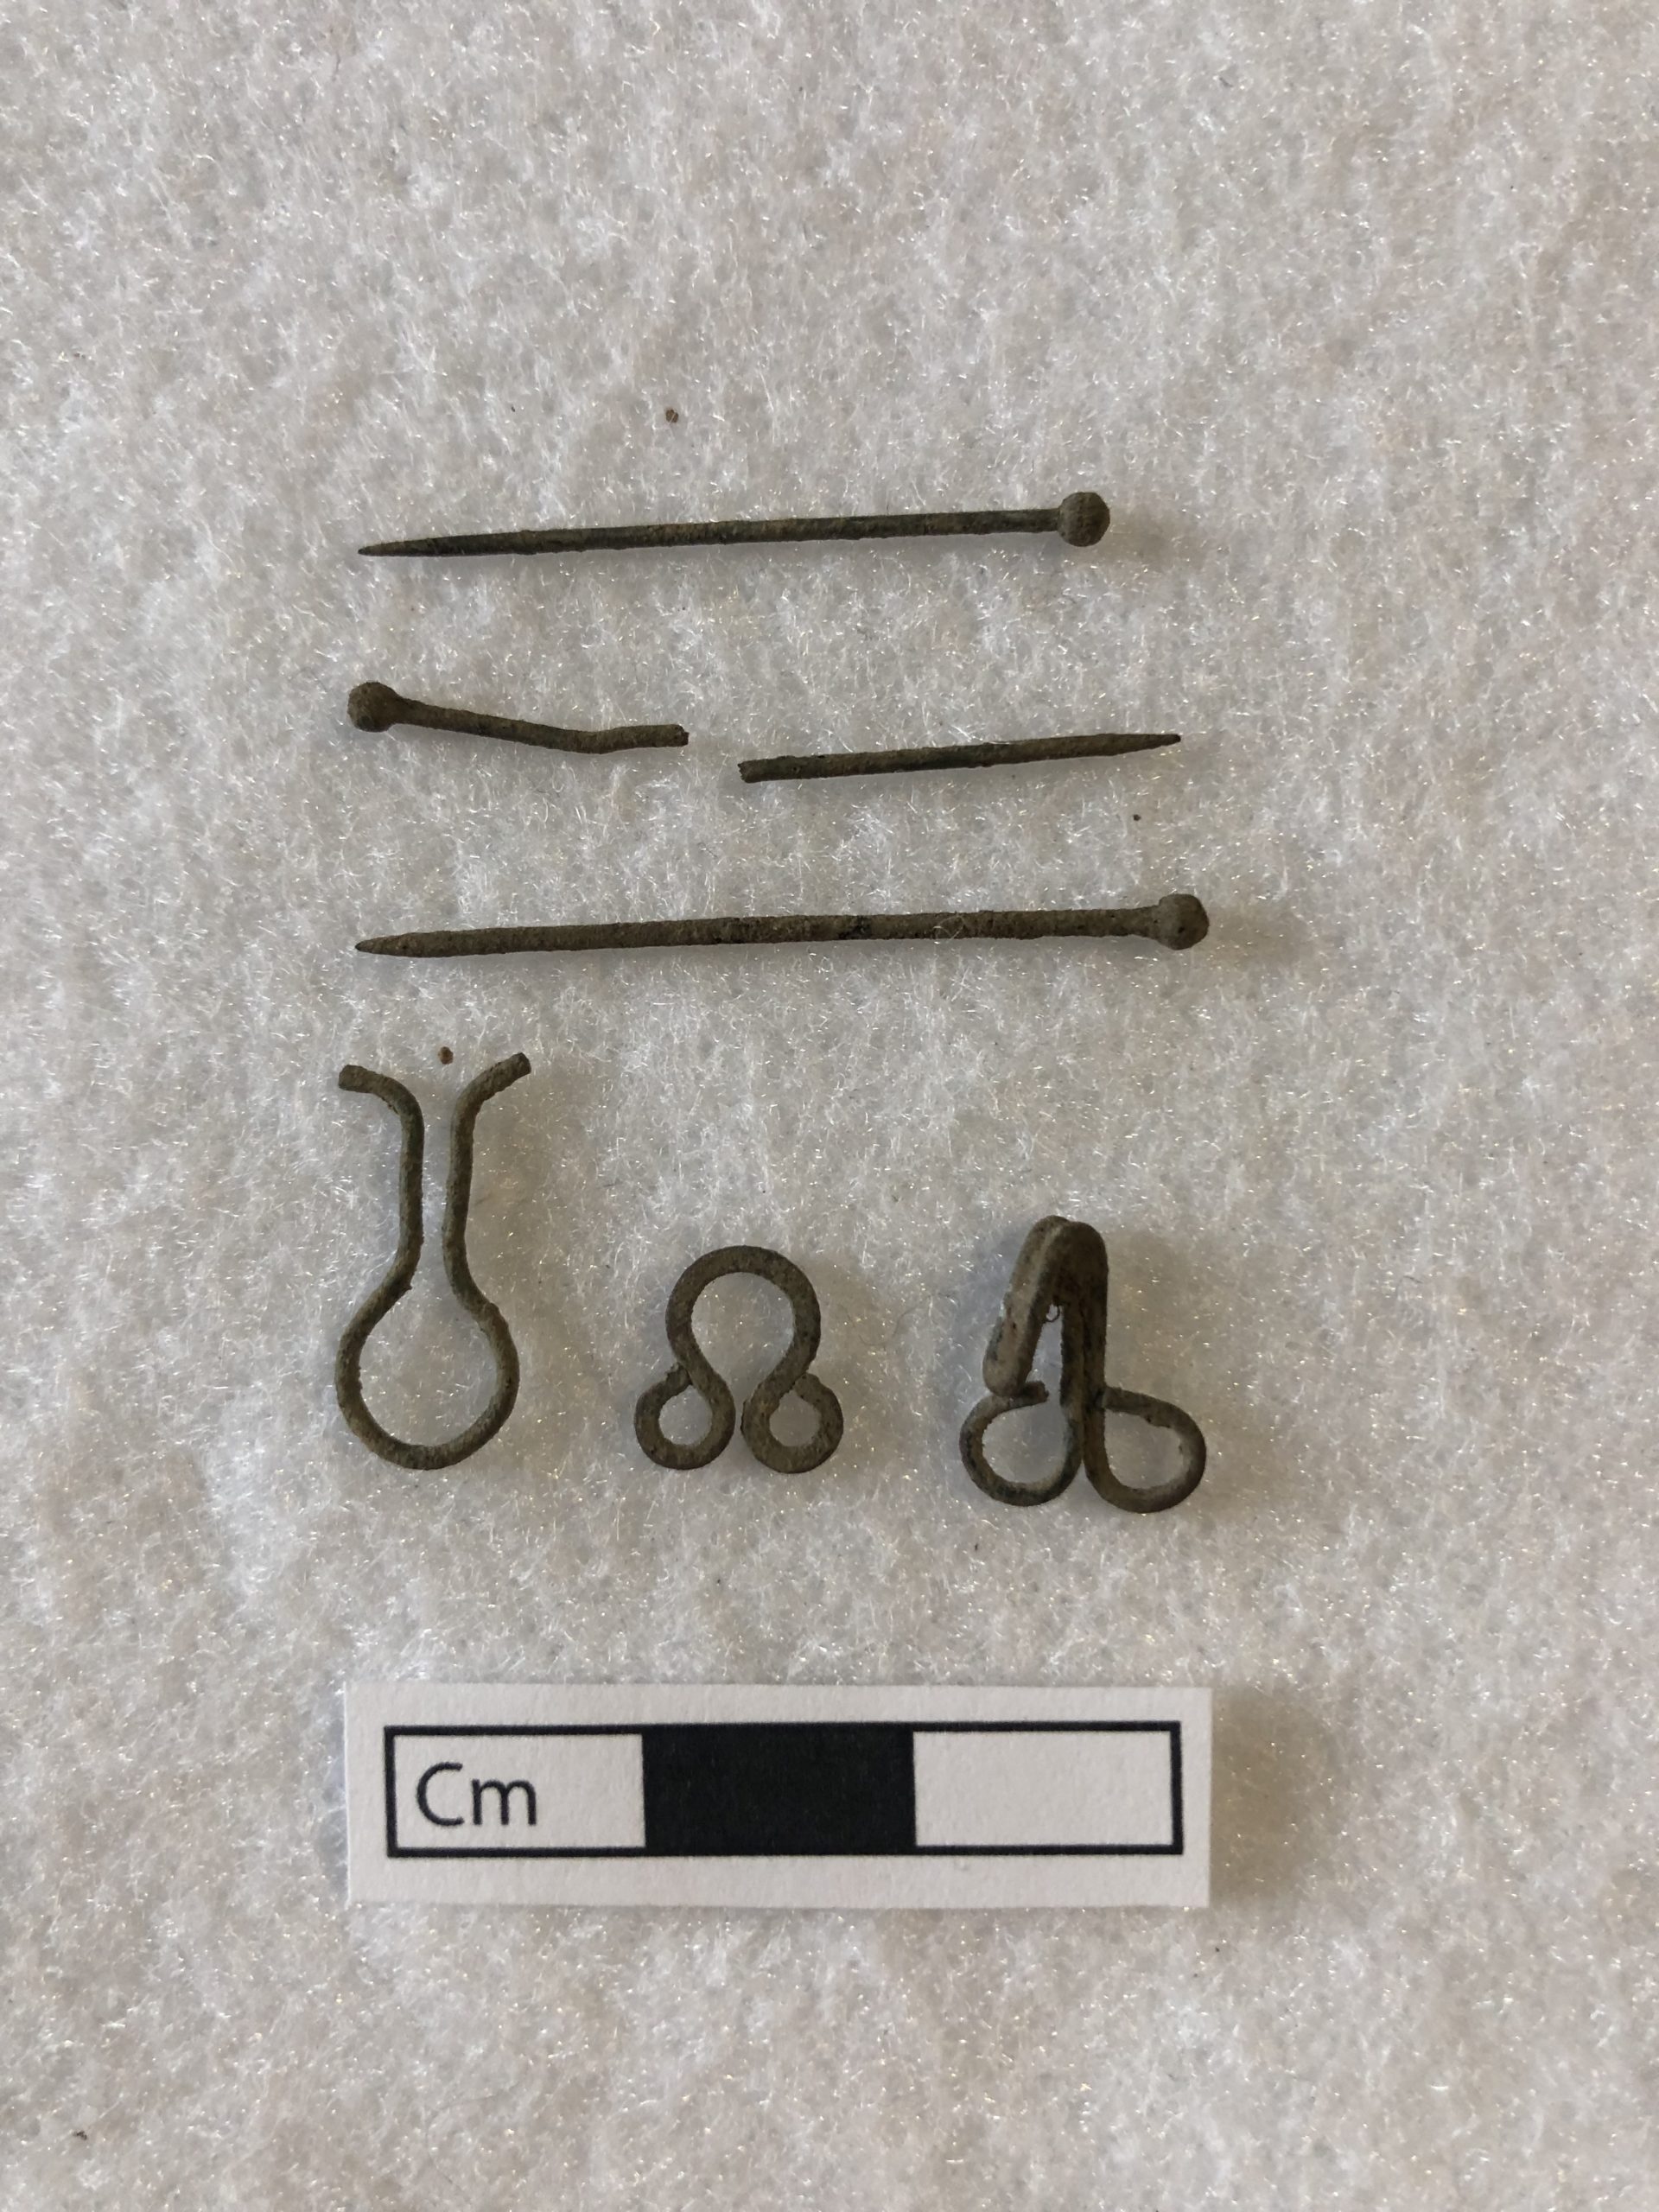 Artifacts discovered during excavation of John Bell House, including pins and clasps.